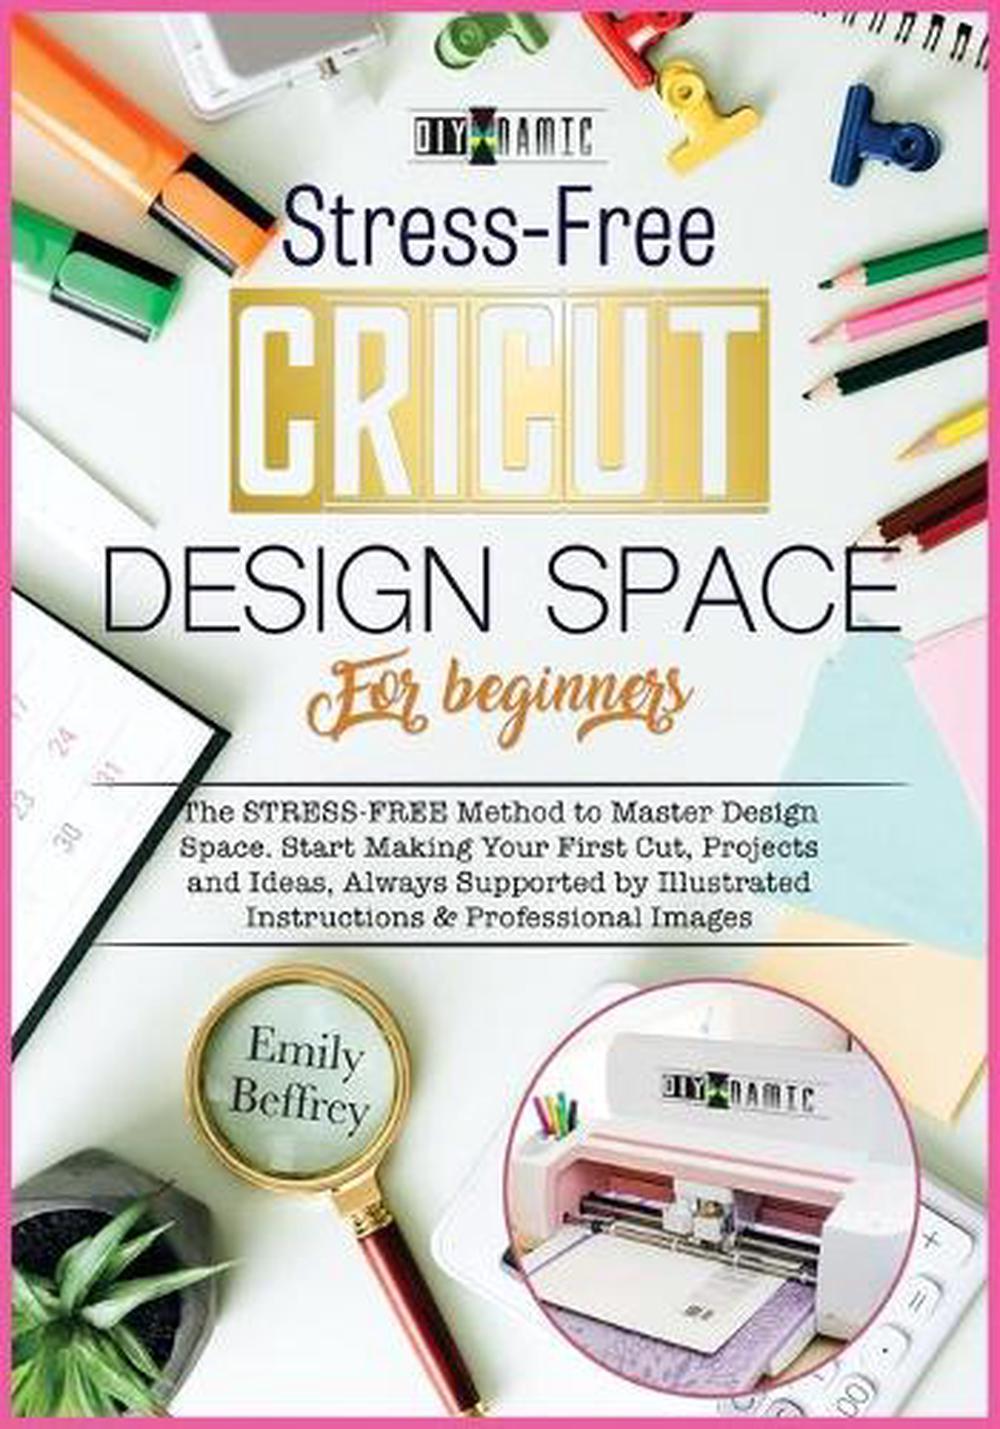 Cricut Design Space for Beginners by Emily Beffrey (English) Paperback